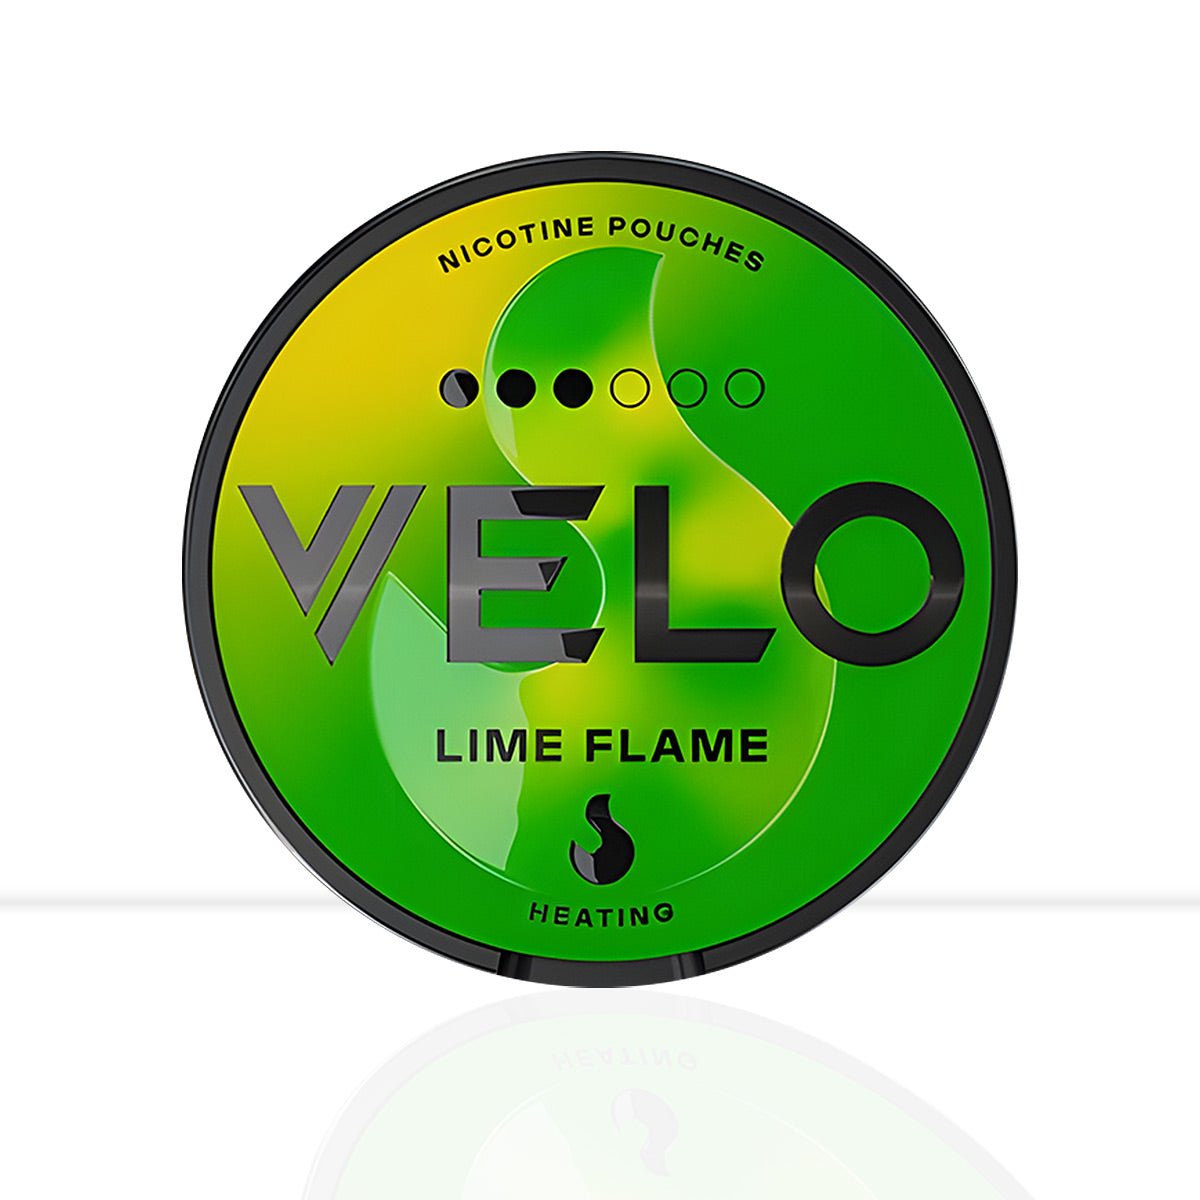 Velo Lime Flame Nicotine Pouch - Velo Lime Flame Nicotine Pouch